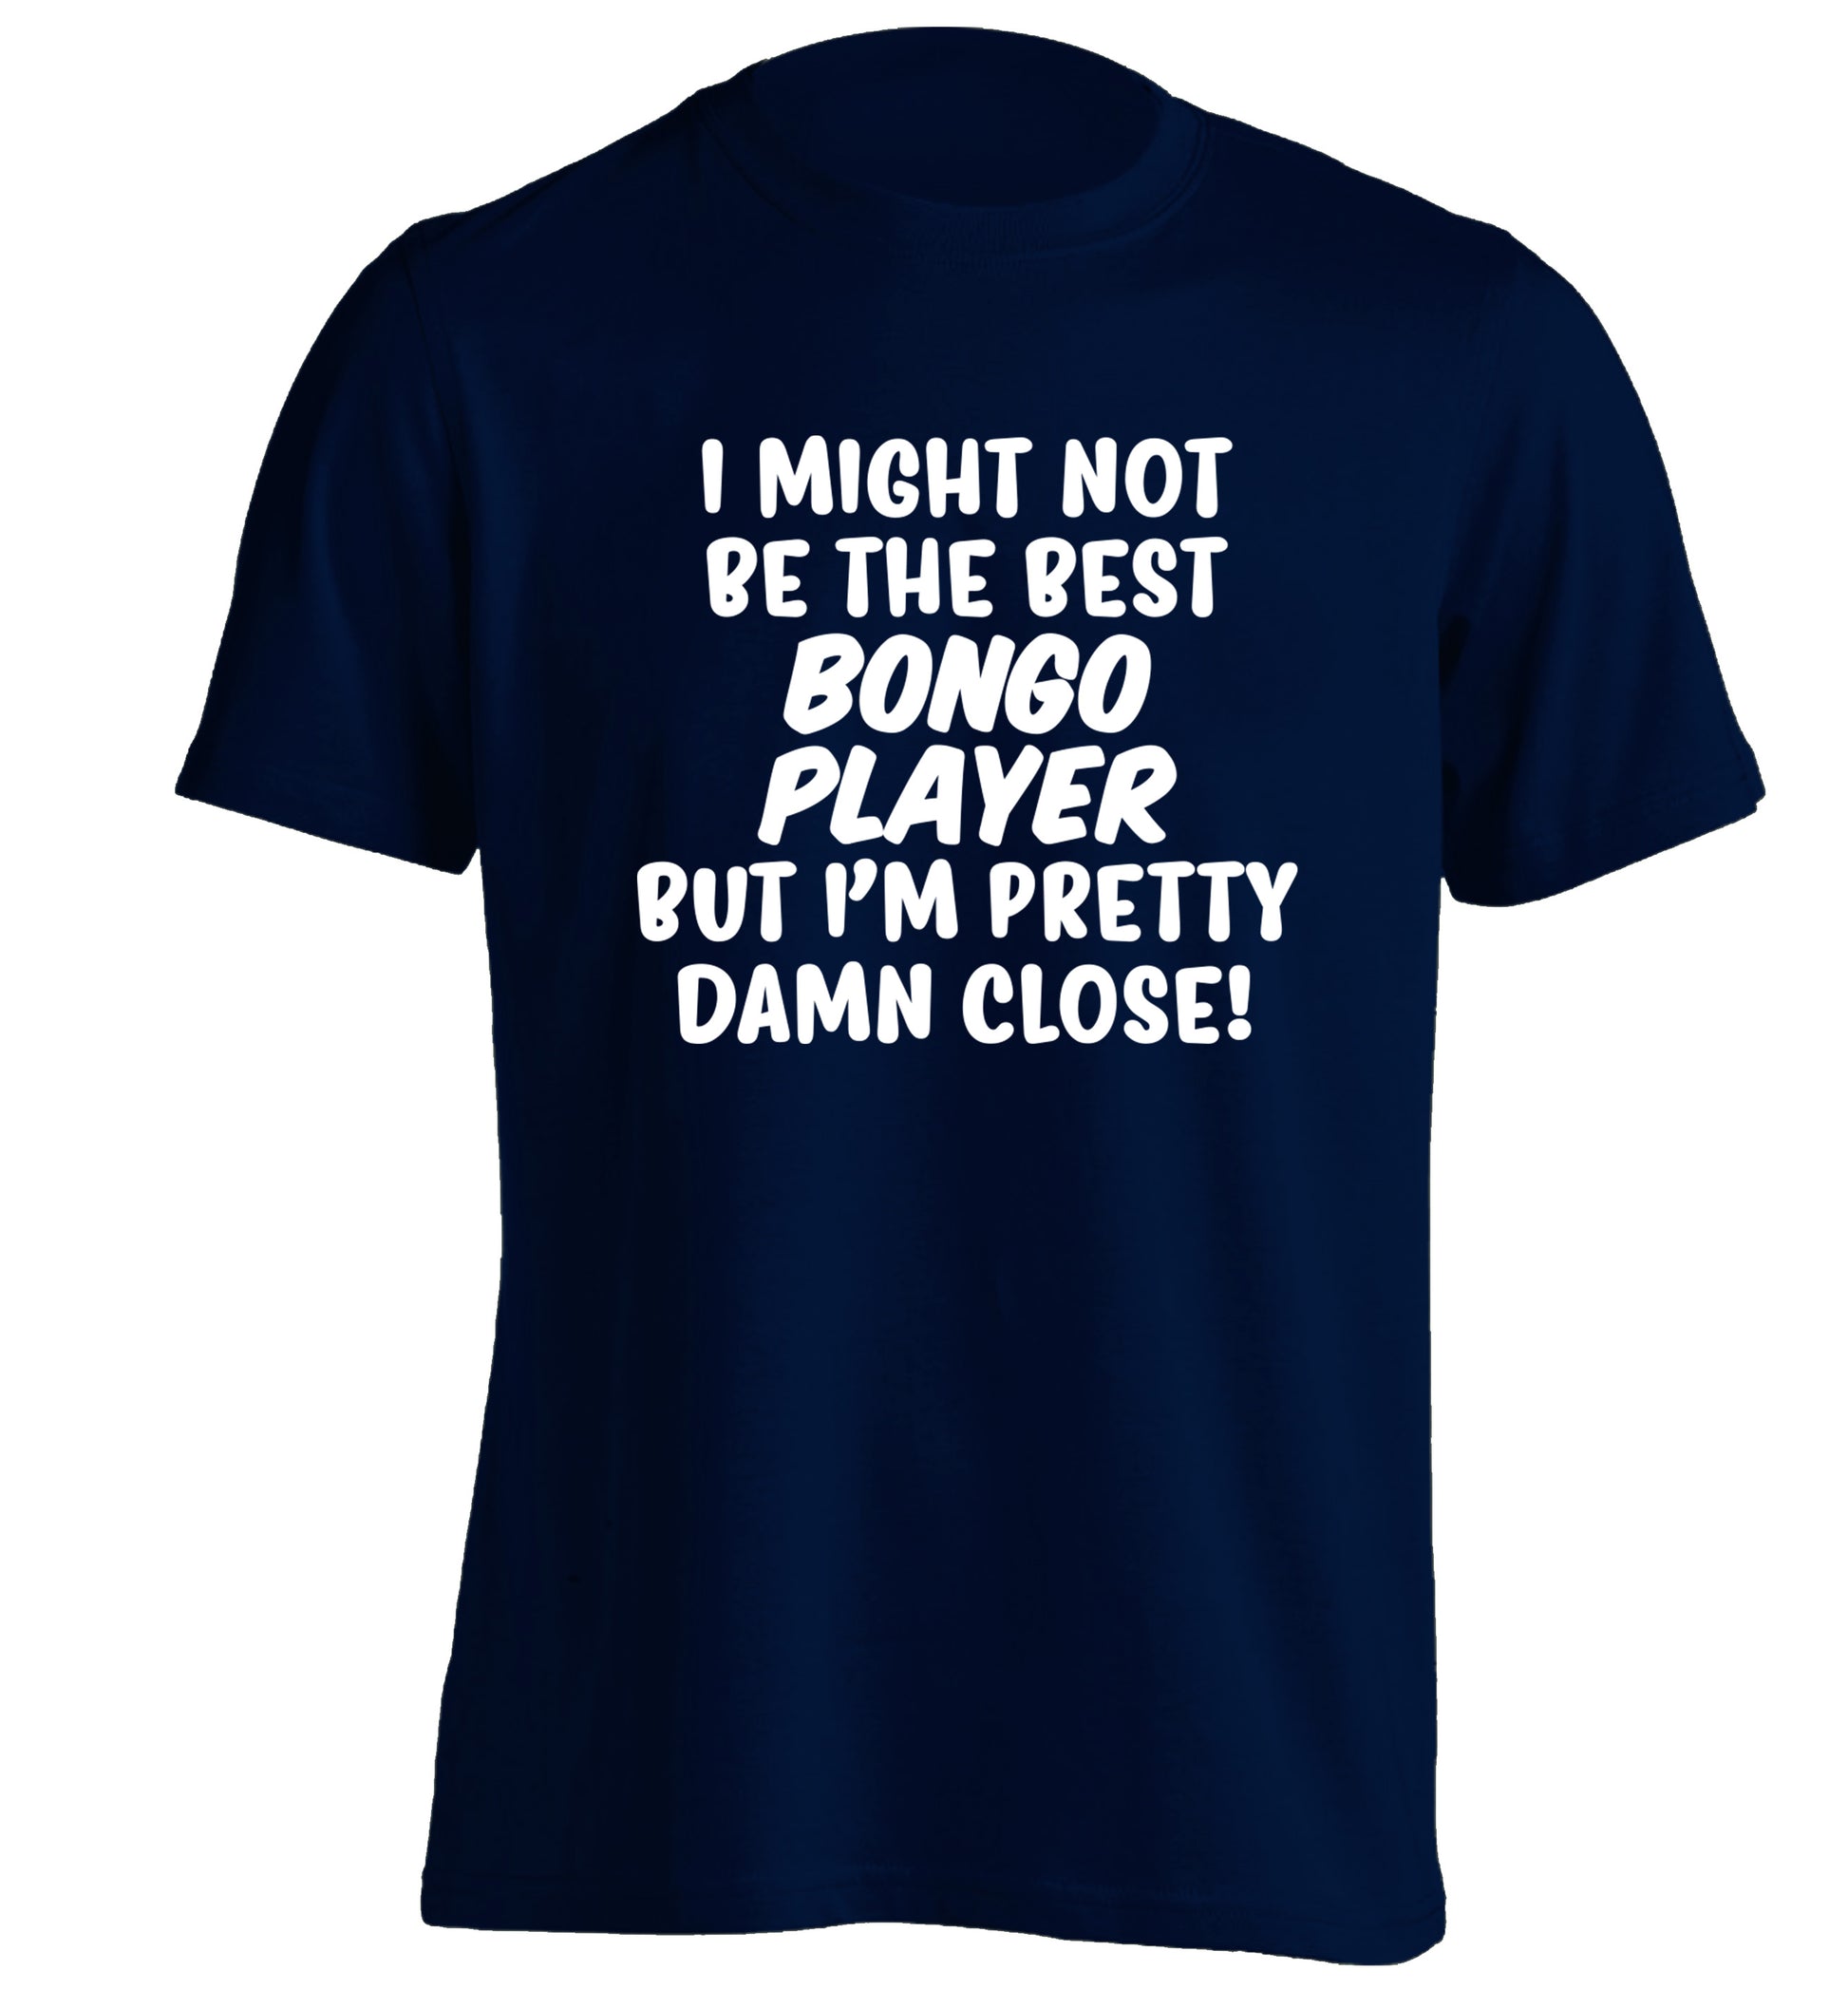 I might not be the best bongo player but I'm pretty close! adults unisexnavy Tshirt 2XL